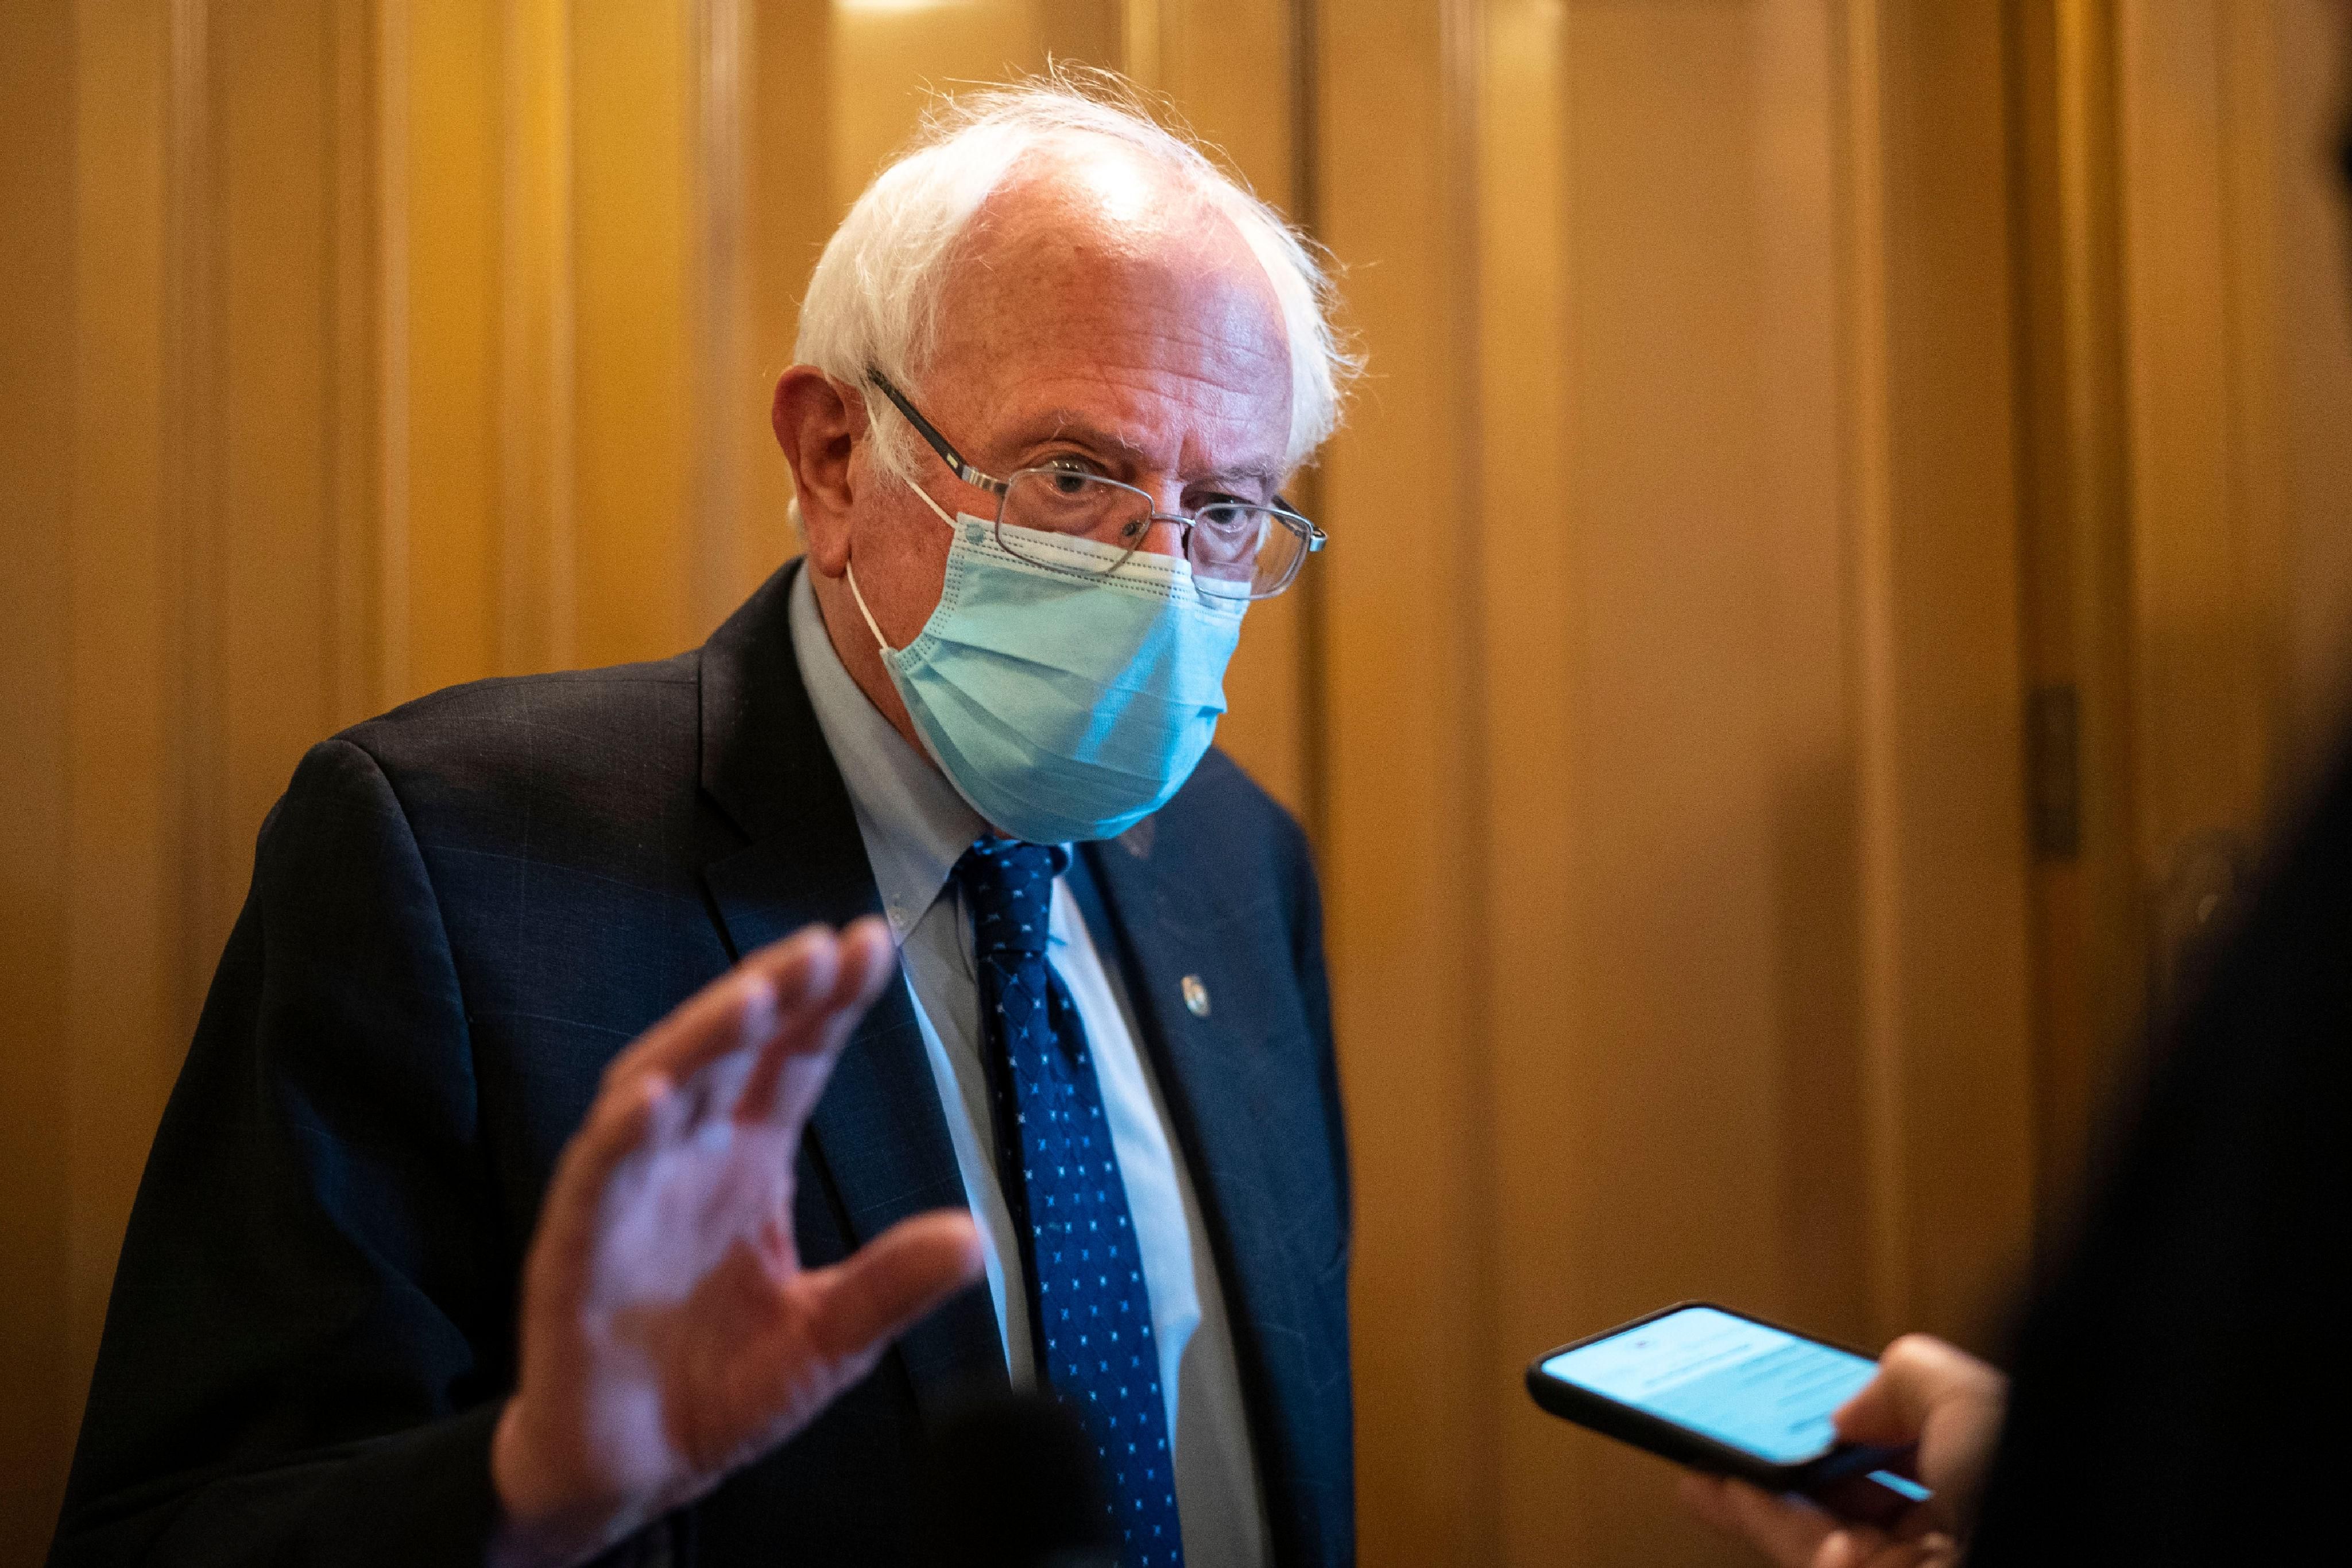 Sen. Bernie Sanders (I-Vt.) speaks to reporters following a vote at the U.S. Capitol on April 12, 2021 in Washington, D.C.